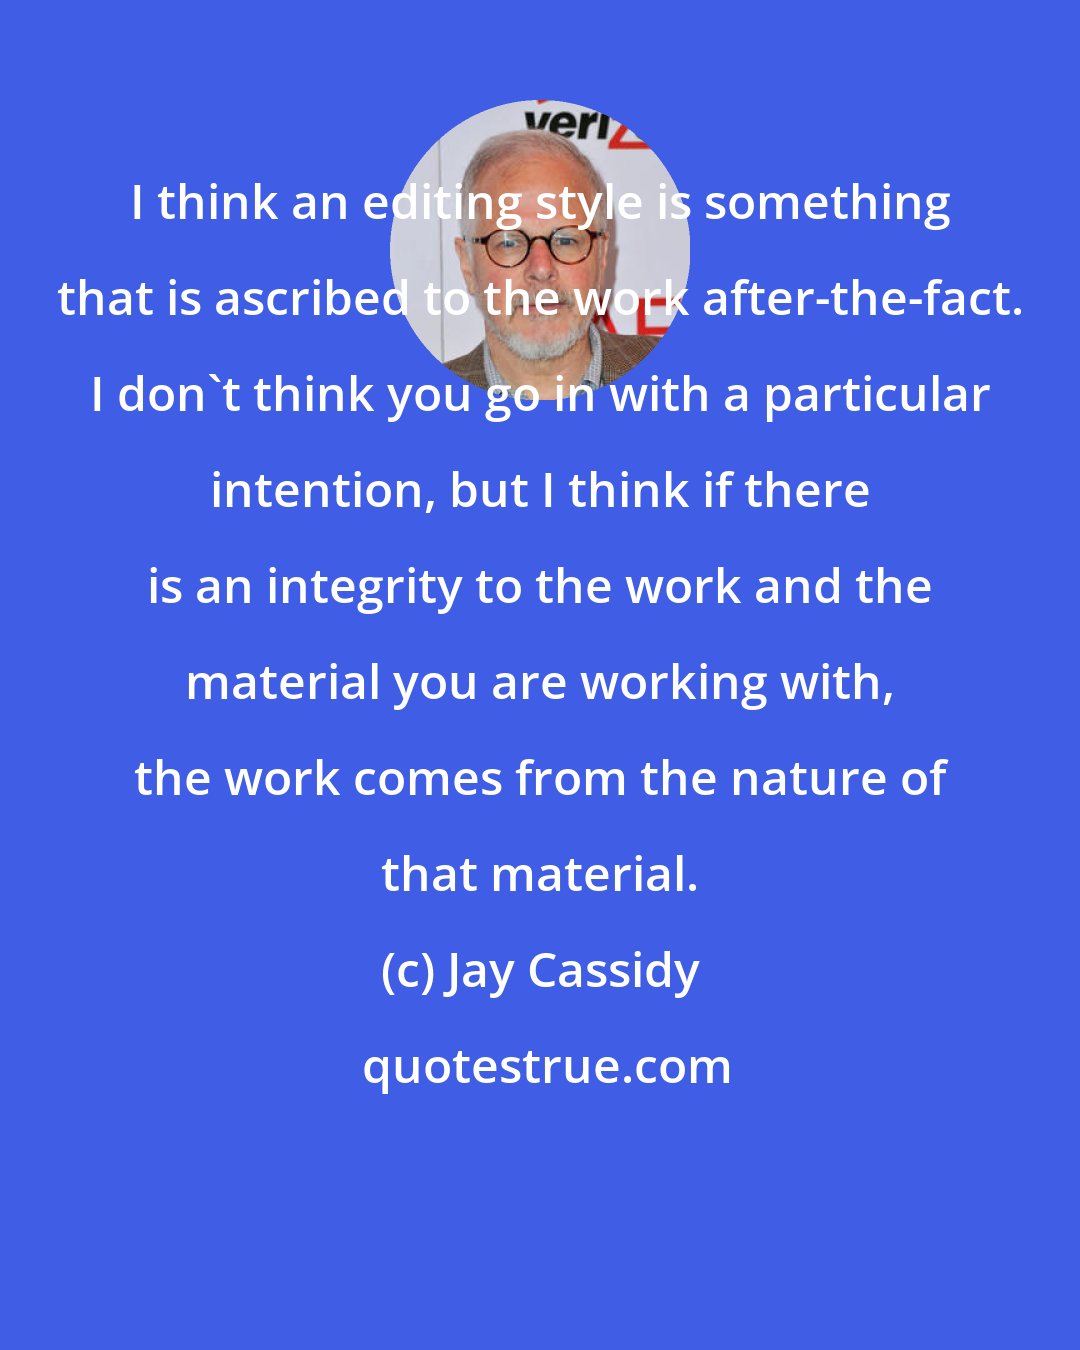 Jay Cassidy: I think an editing style is something that is ascribed to the work after-the-fact. I don't think you go in with a particular intention, but I think if there is an integrity to the work and the material you are working with, the work comes from the nature of that material.